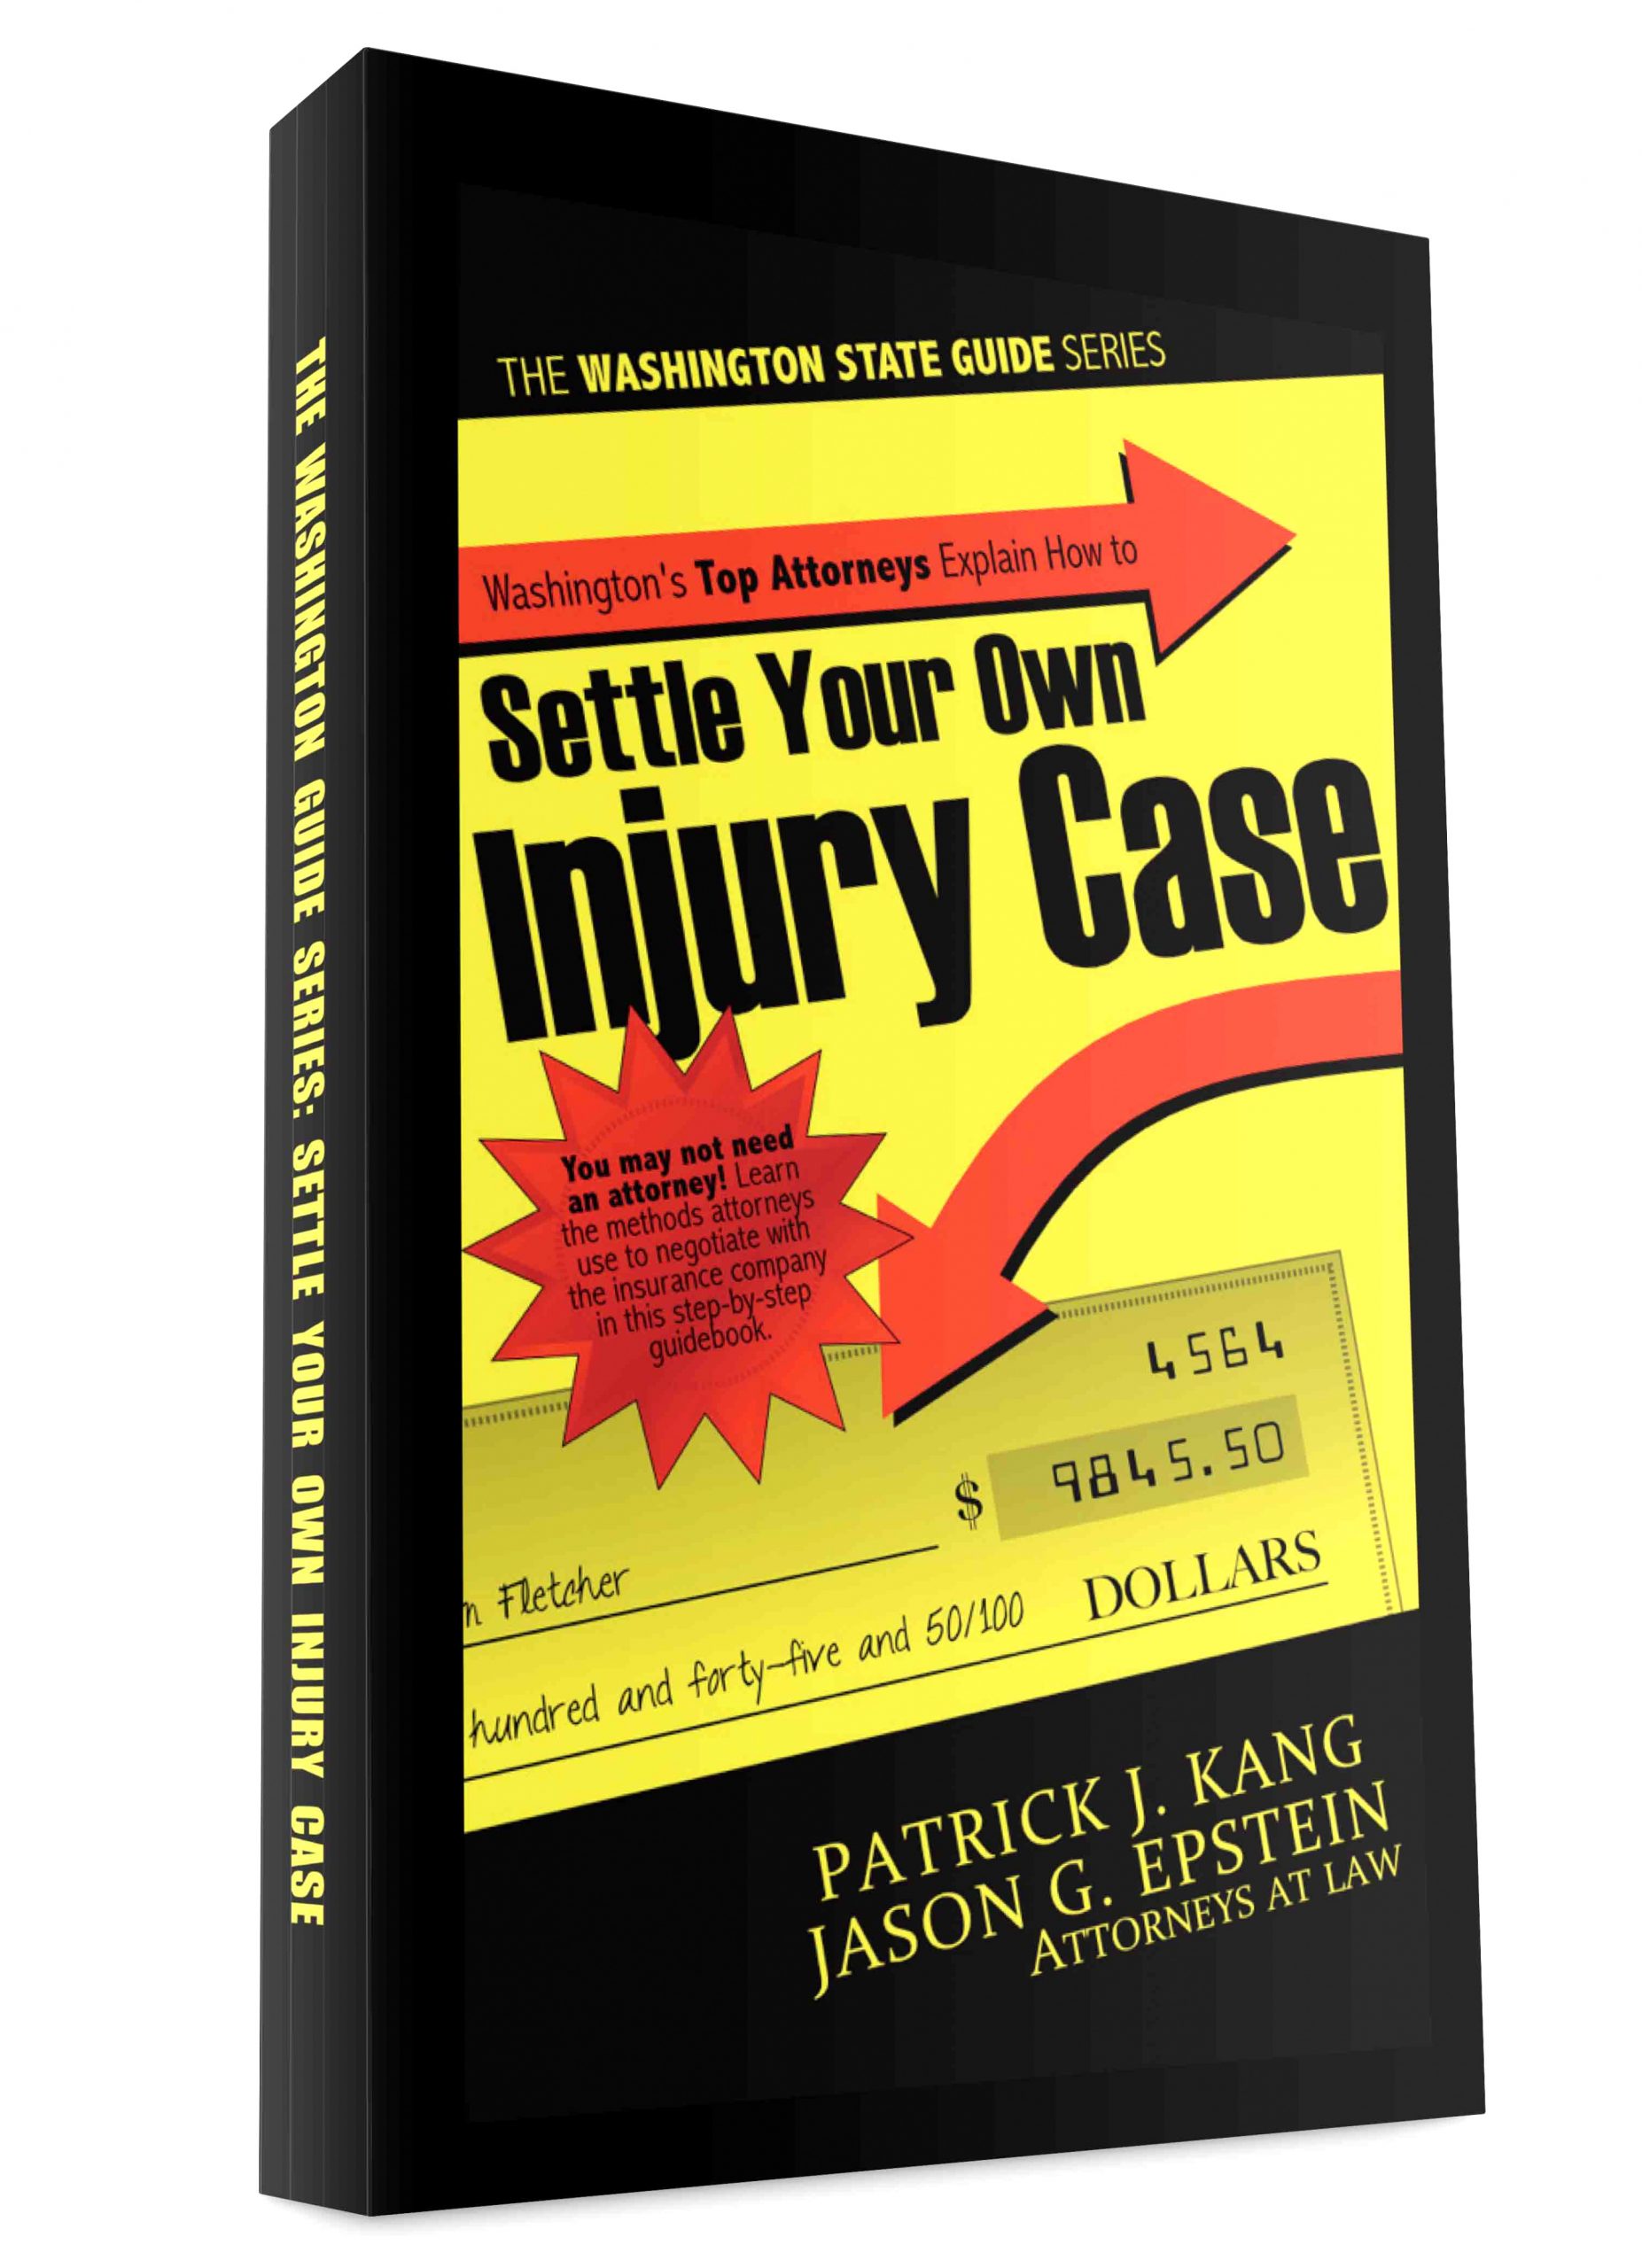 Personal Injury Lawyer Federal Way Dans Settle Your Own Injury Case Free Book